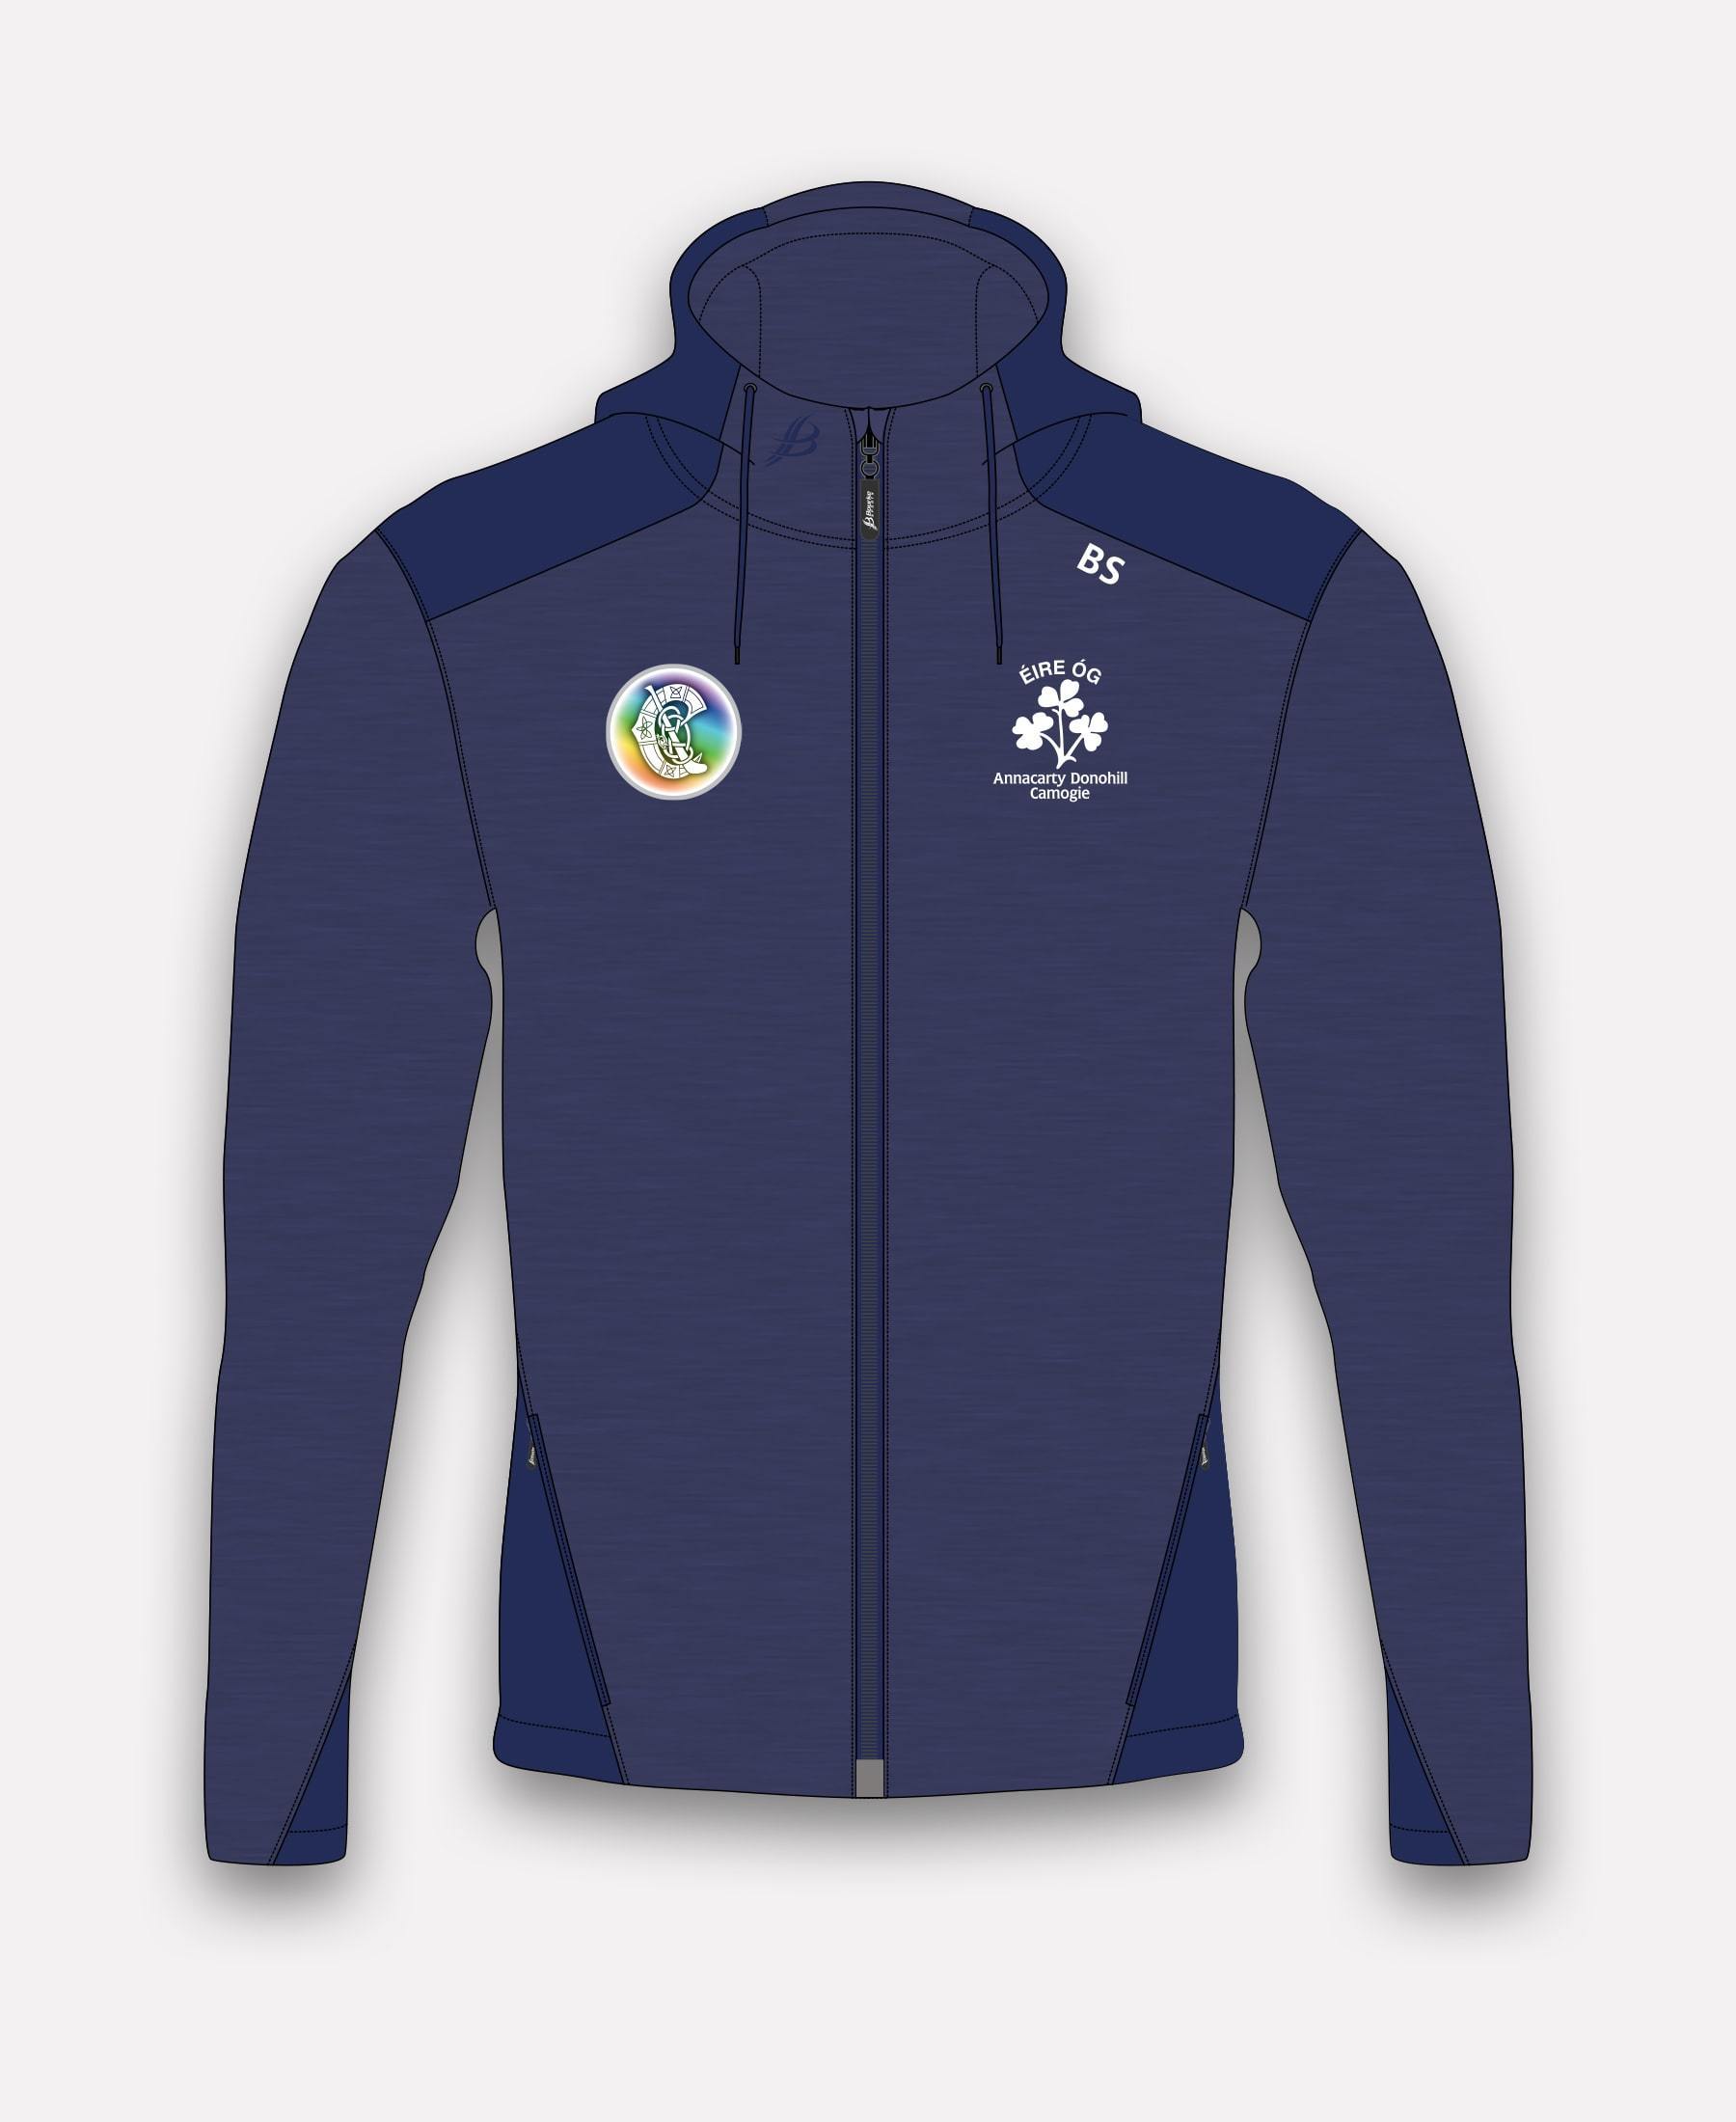 Eire Og Annacarty Donohill Camogie BUA Hoody - Bourke Sports Limited